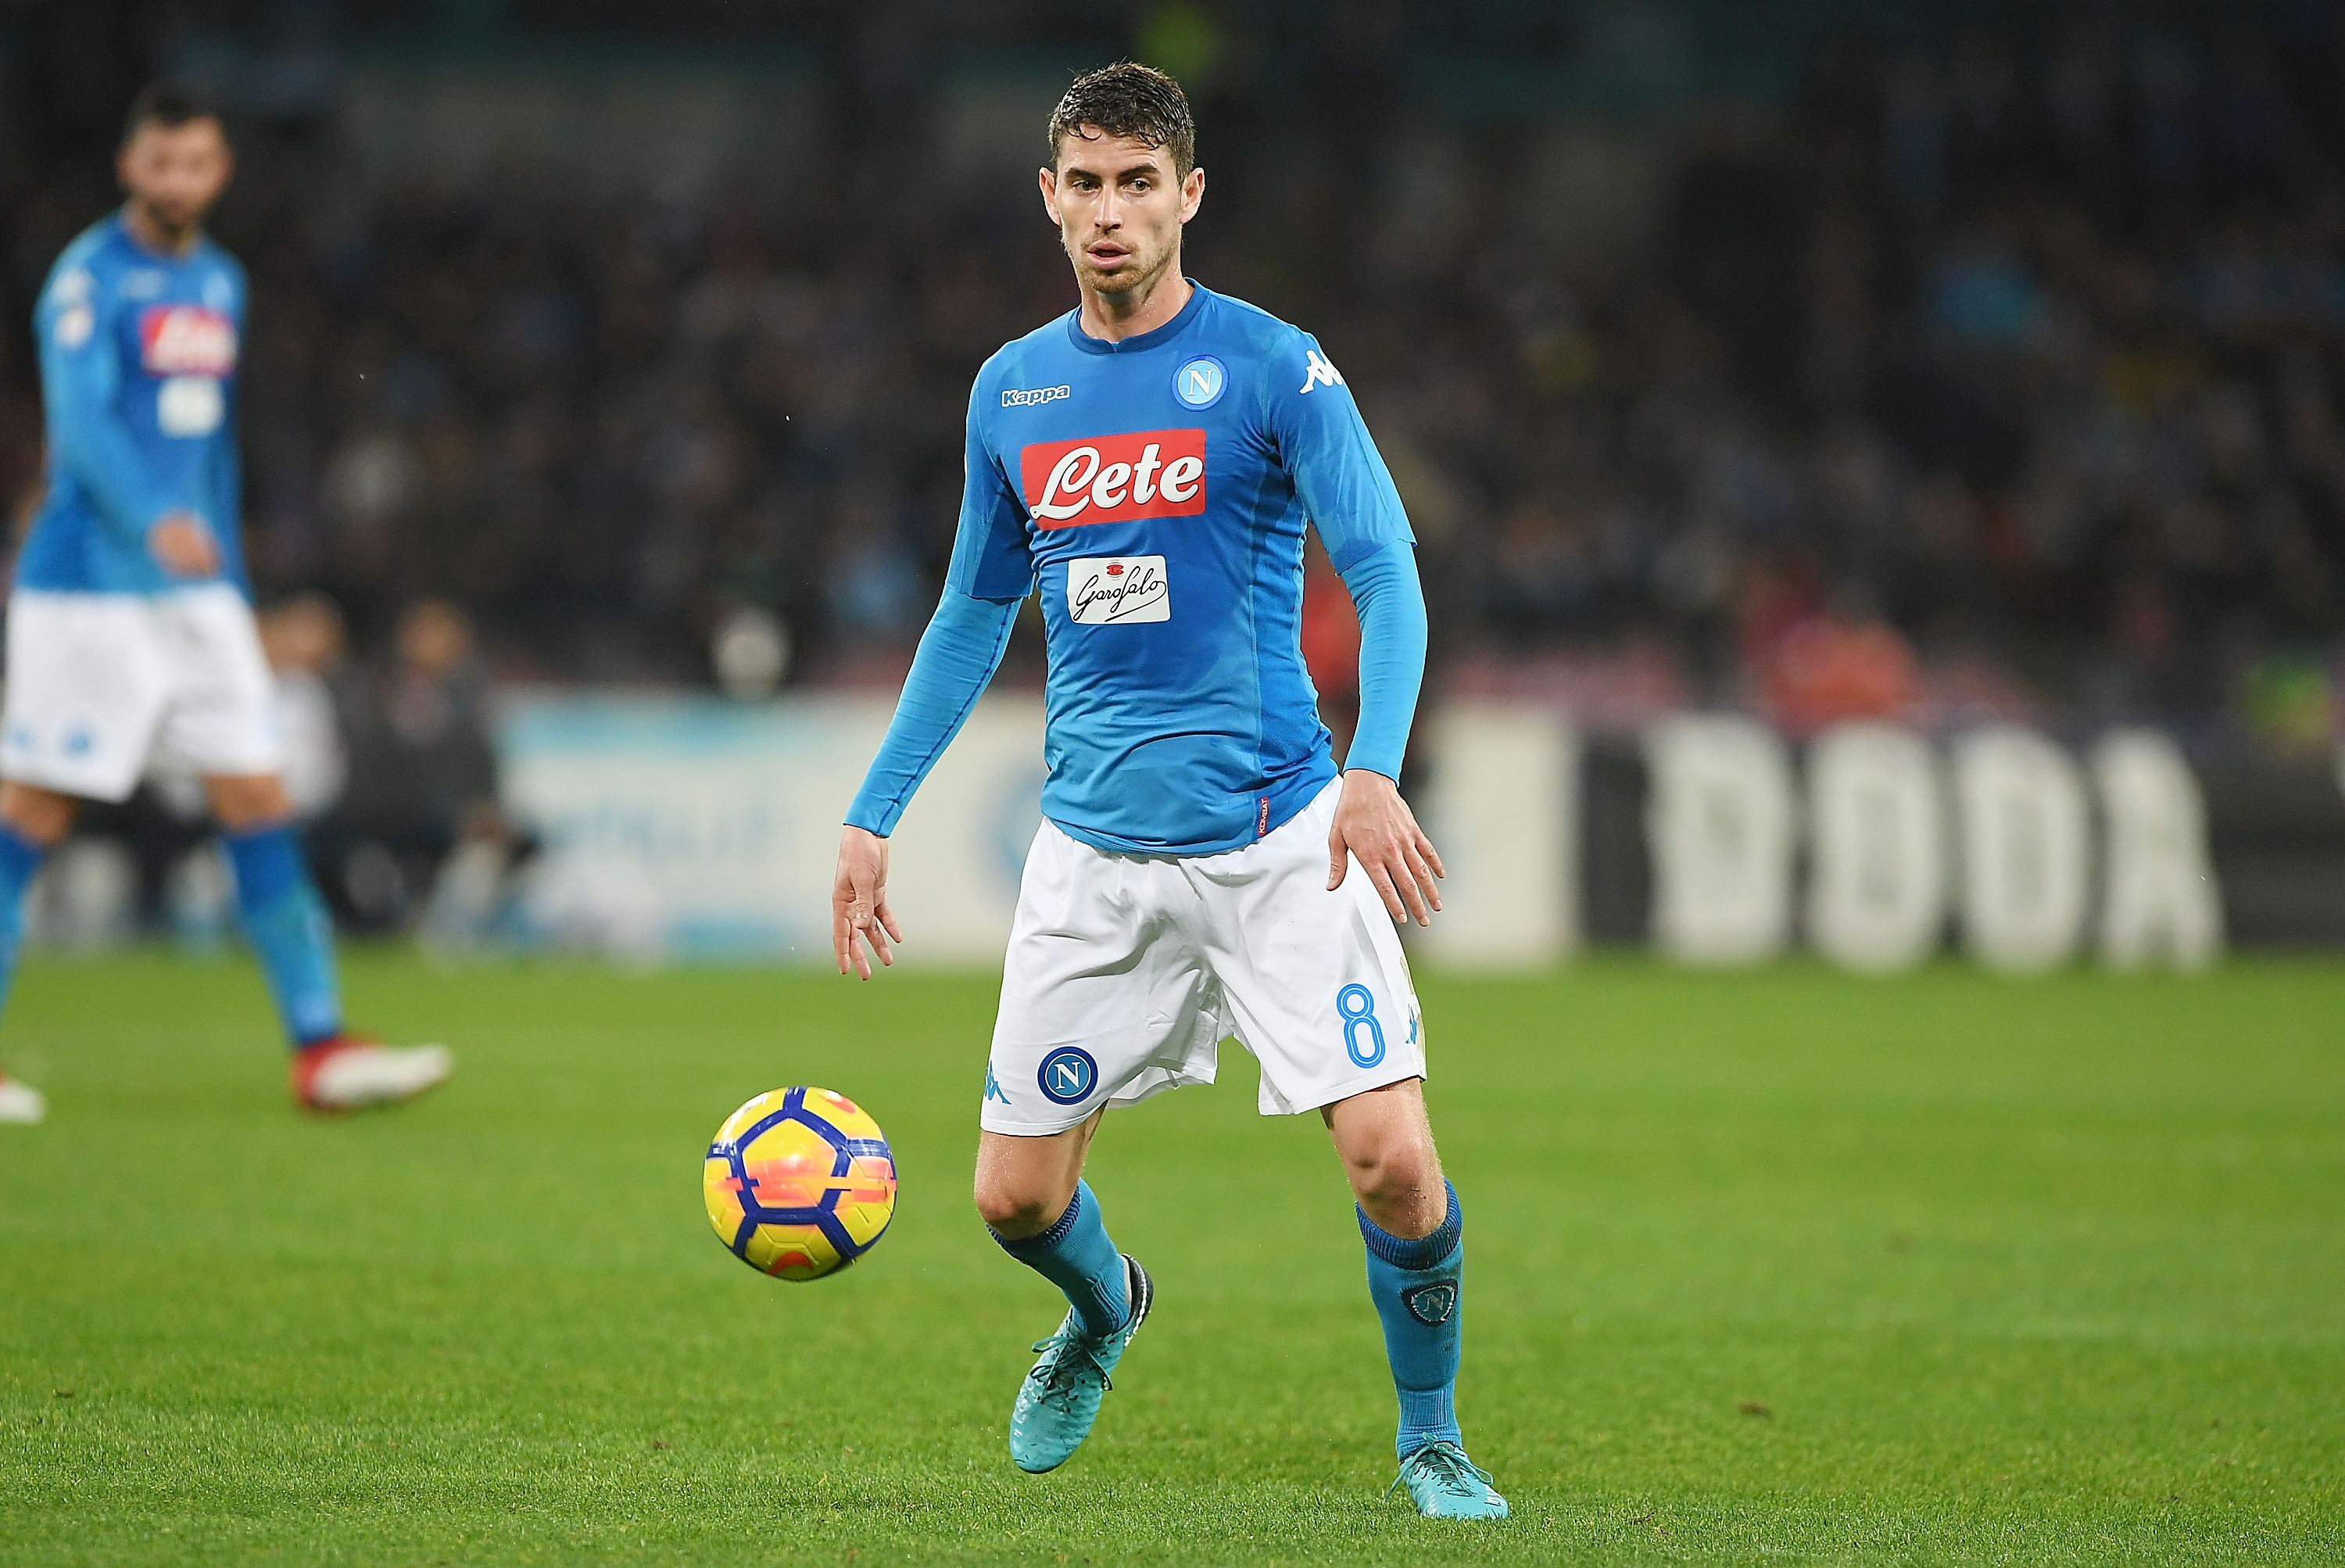 NAPLES, ITALY - MARCH 03:  Jorginho of SSC Napoli in action during the serie A match between SSC Napoli and AS Roma - Serie A at Stadio San Paolo on March 3, 2018 in Naples, Italy.  (Photo by Francesco Pecoraro/Getty Images)